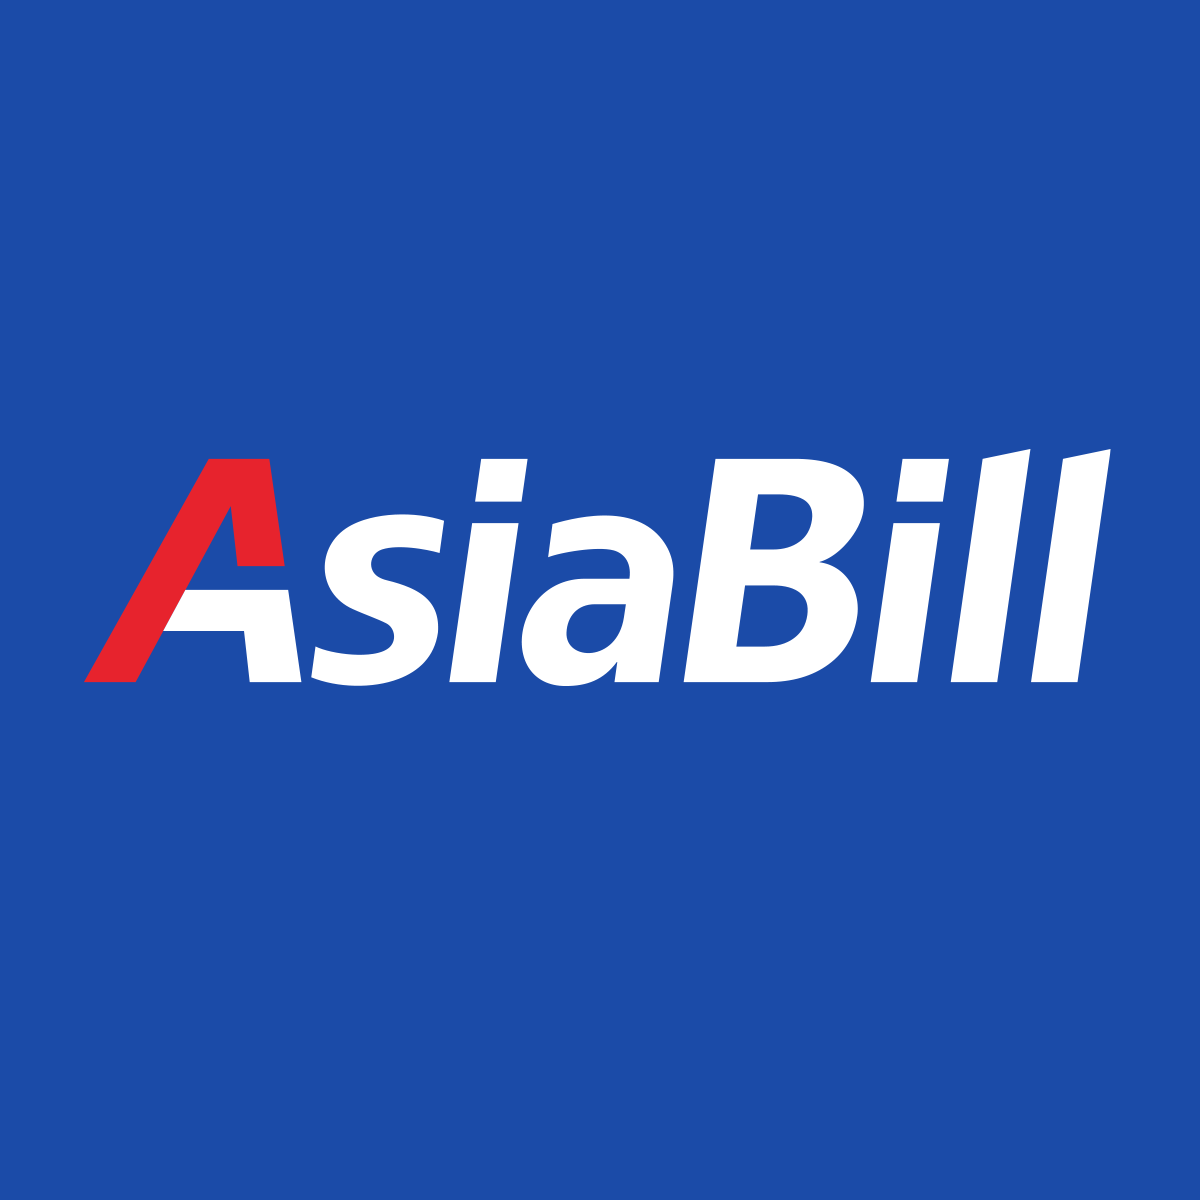 Asiabill Payments